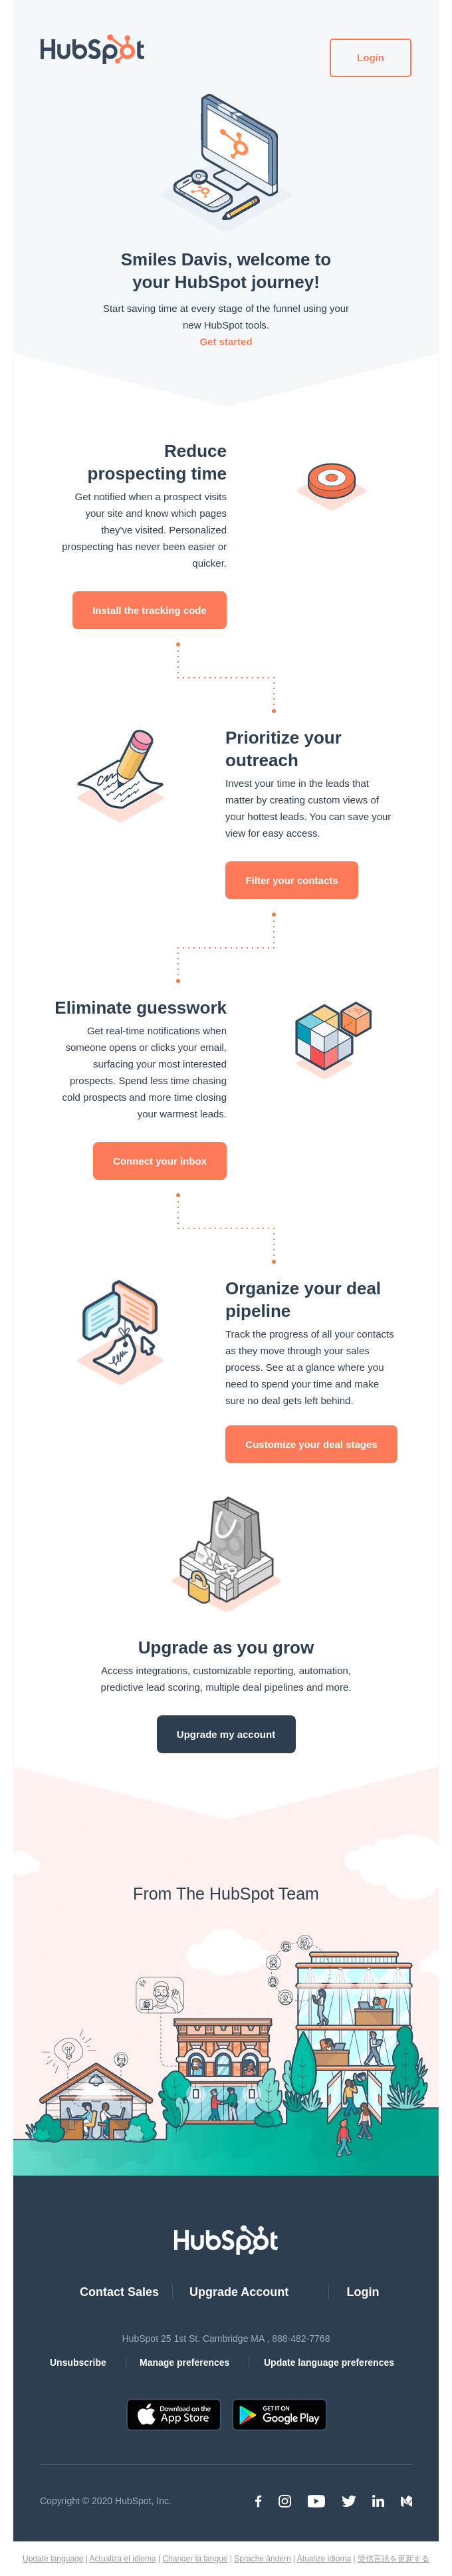 Welcome to your HubSpot journey